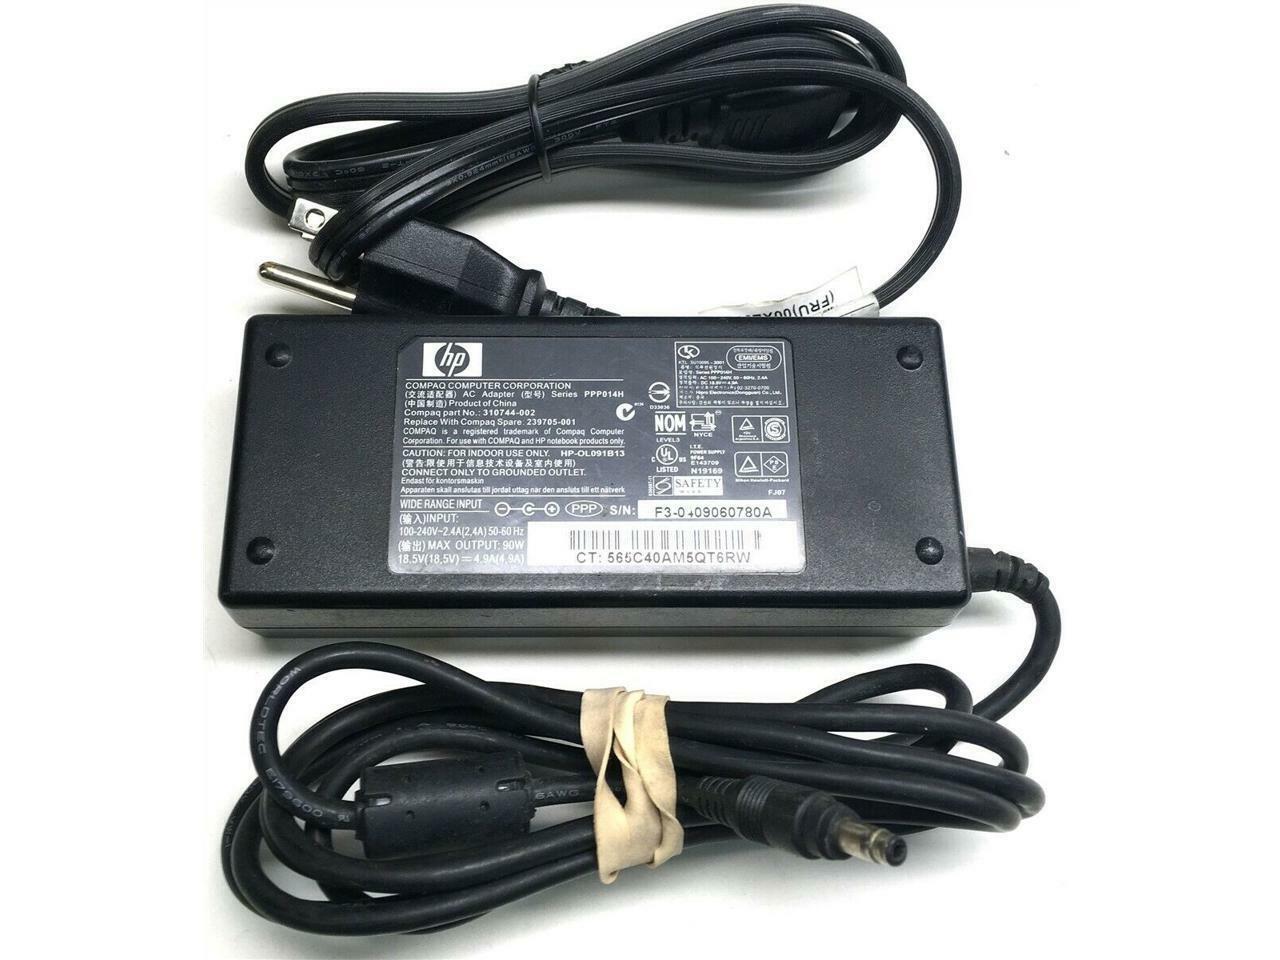 Genuine HP 90W Notebook PC AC Adapter Power Charger nw8000 nc8230 nx8220 nw8240